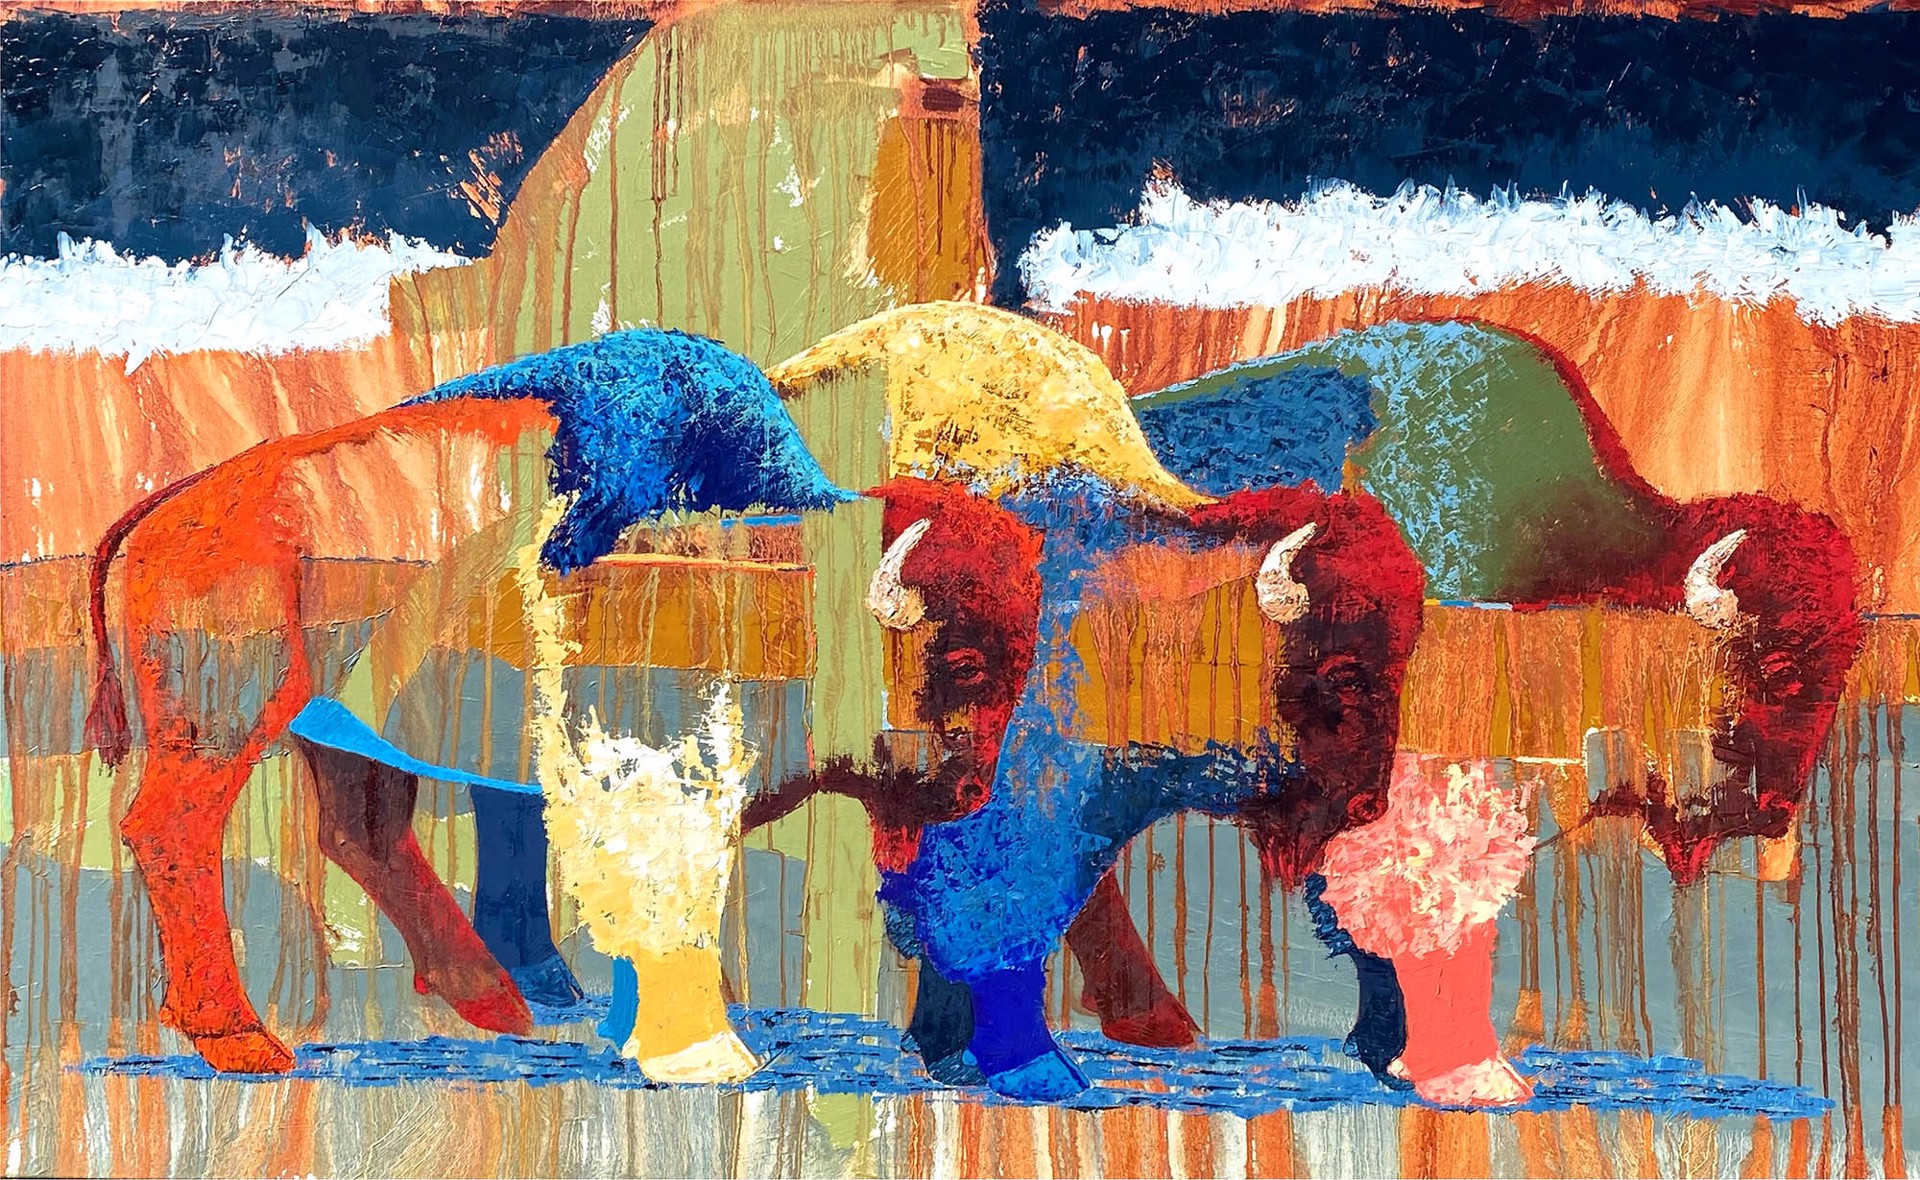 Original Oil Painting Featuring Three Bison Walking In Bright Colored Blocking Over Abstract And Textured Background